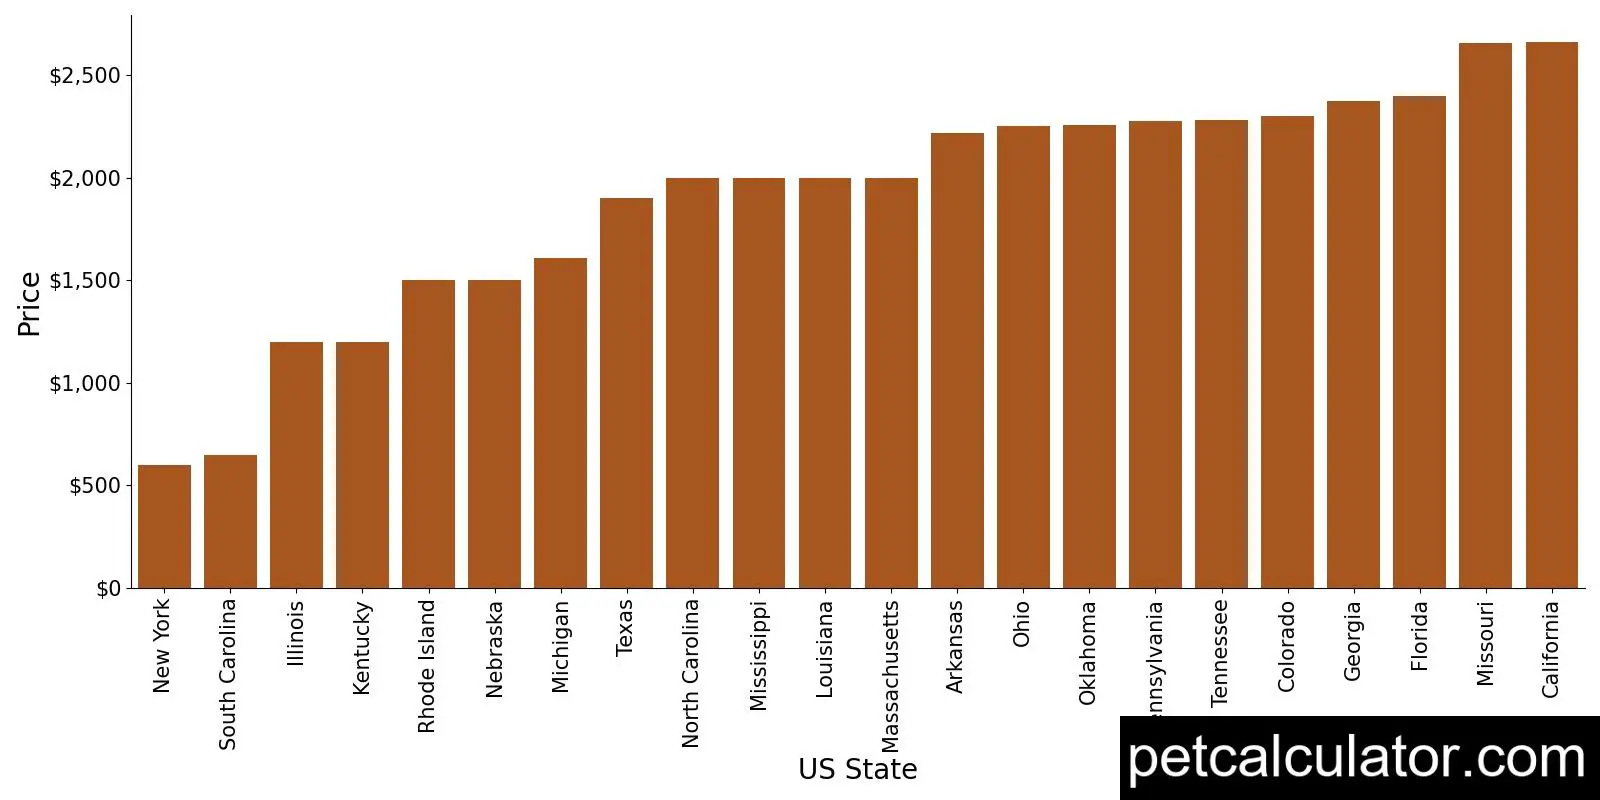 Price of Giant Schnauzer by US State 